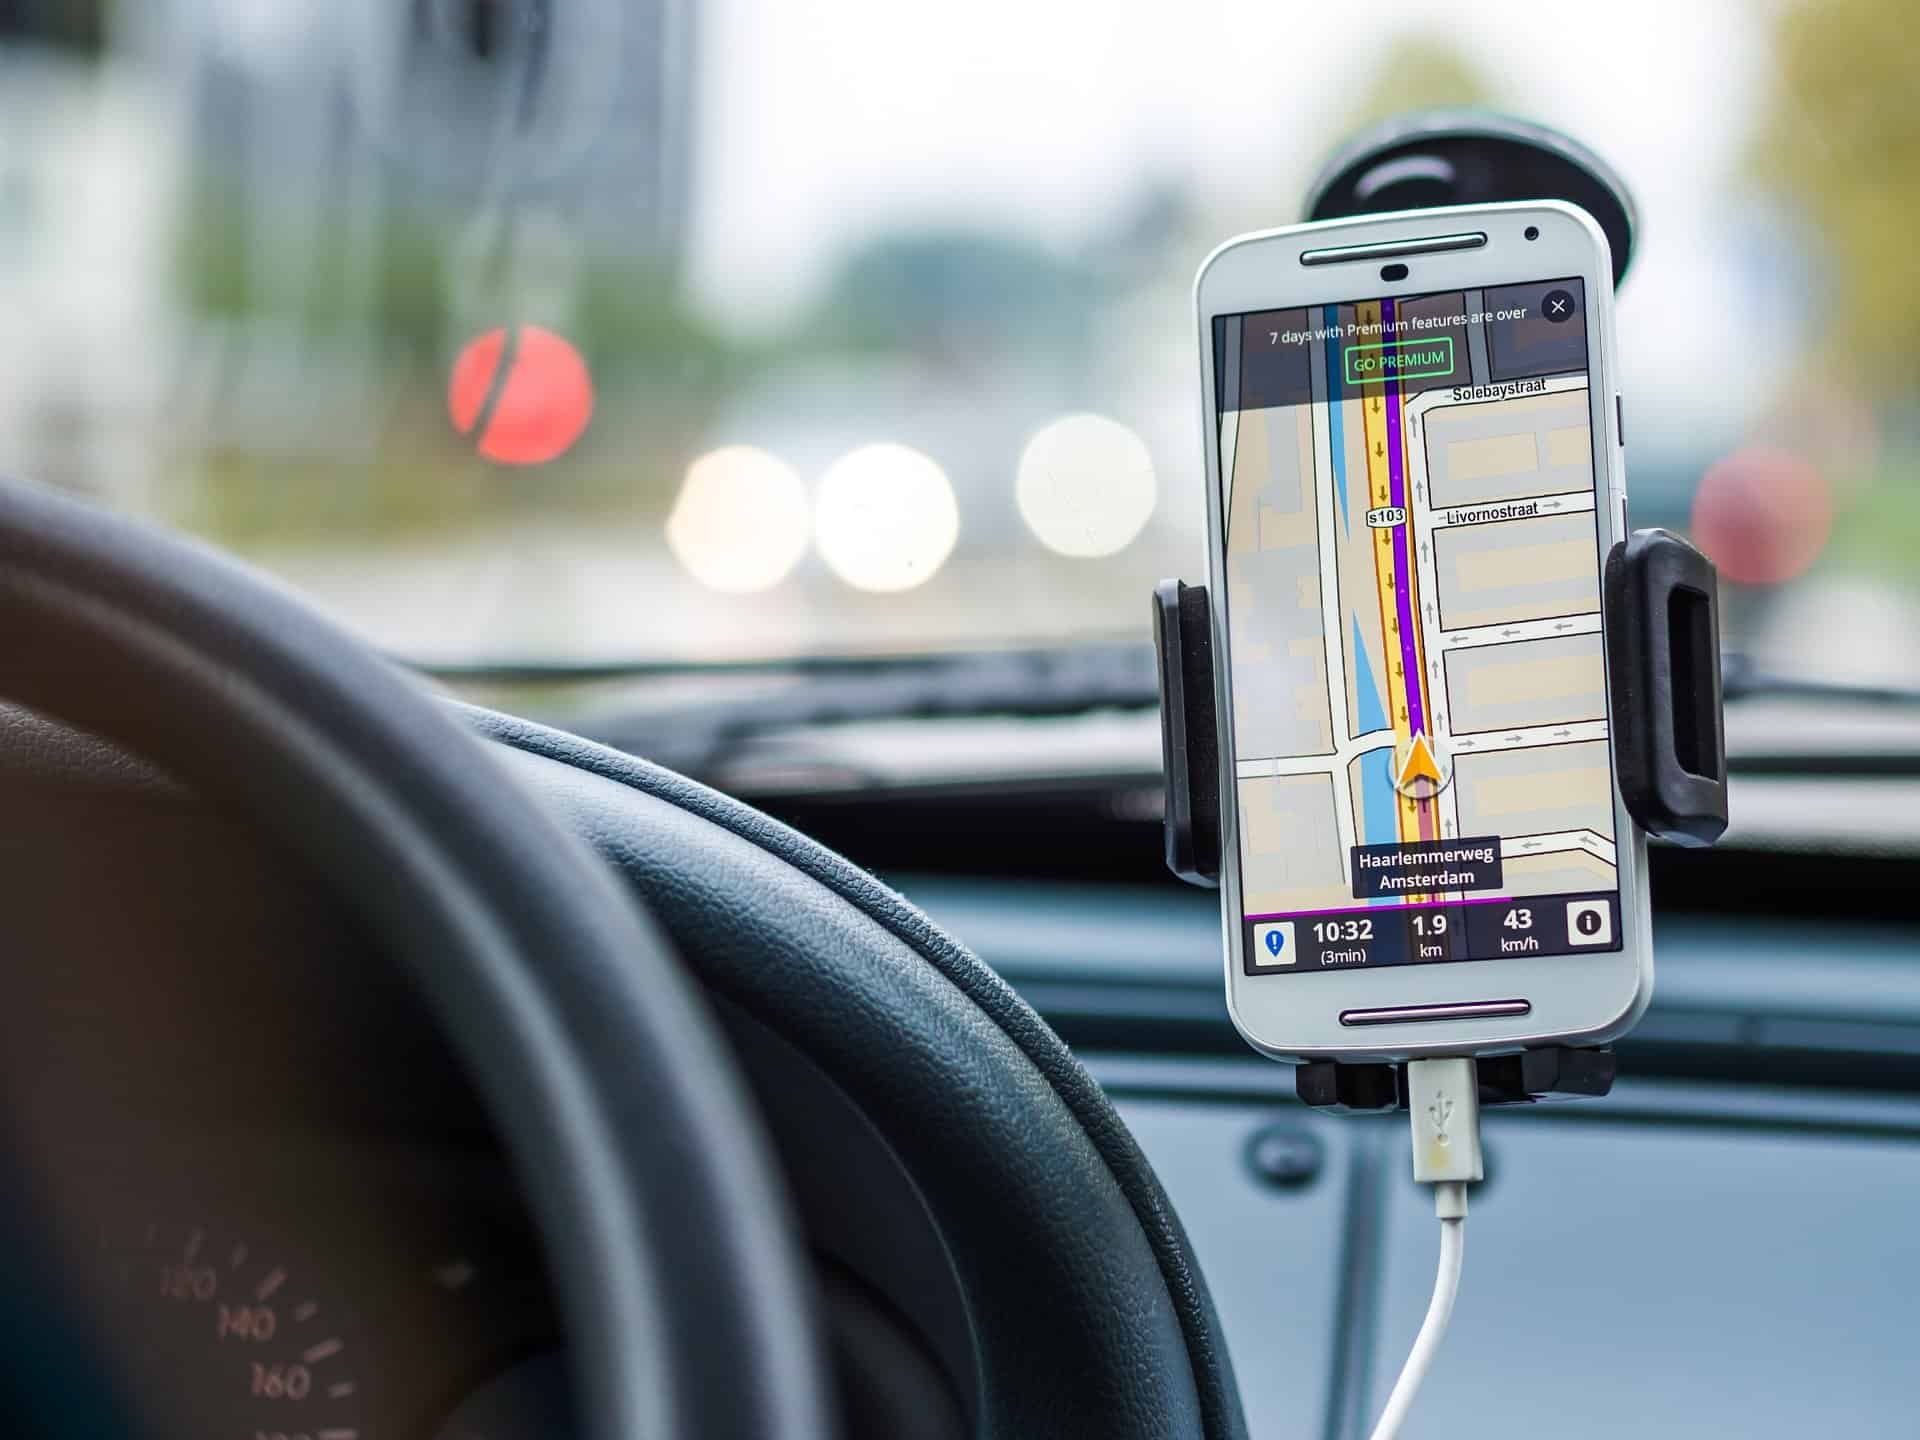 GPS in the car – phone or dedicated device?